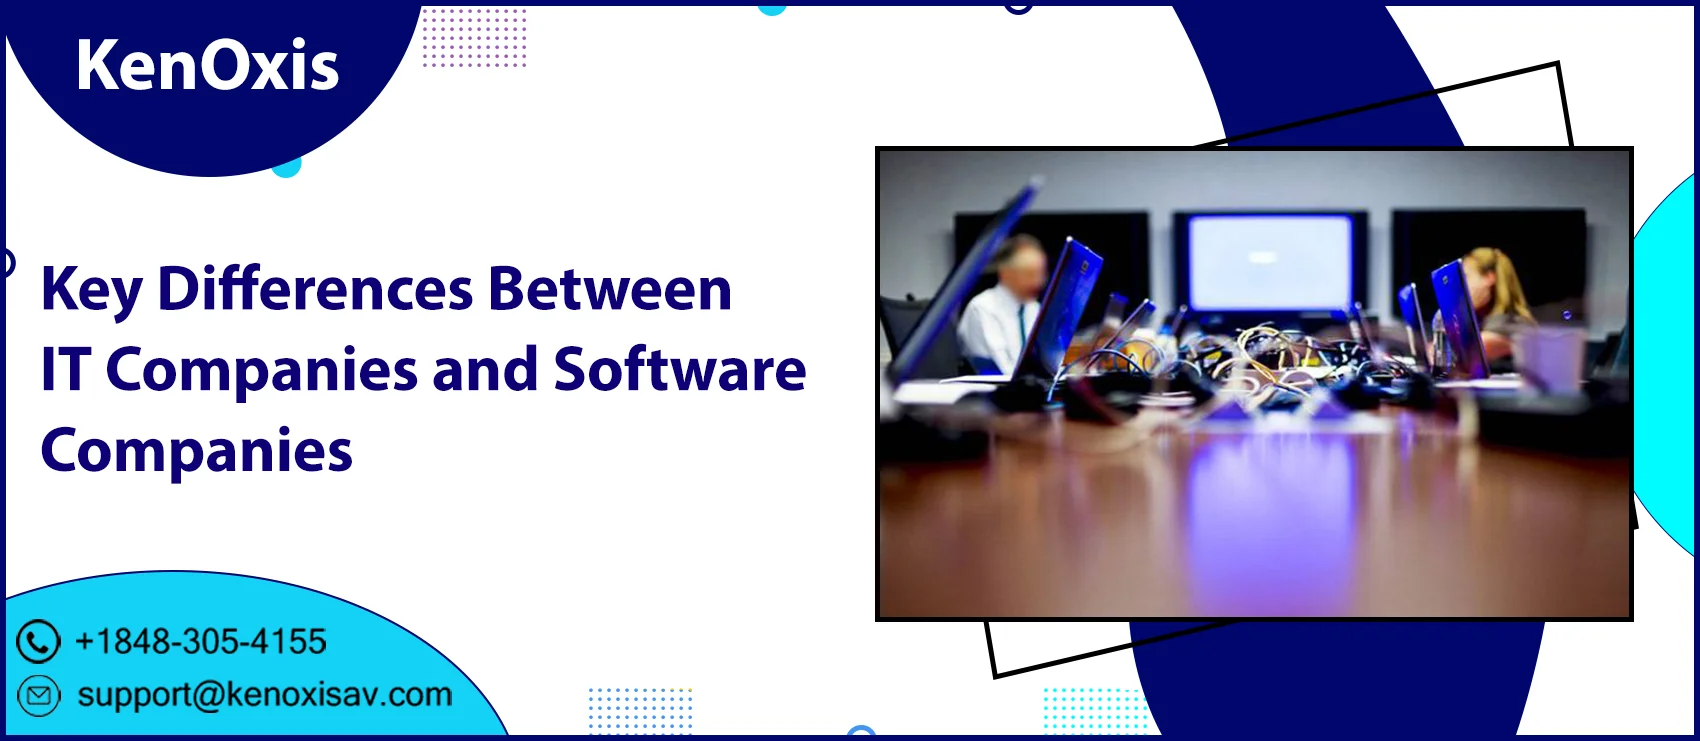 Key Differences Between IT Companies and Software Companies